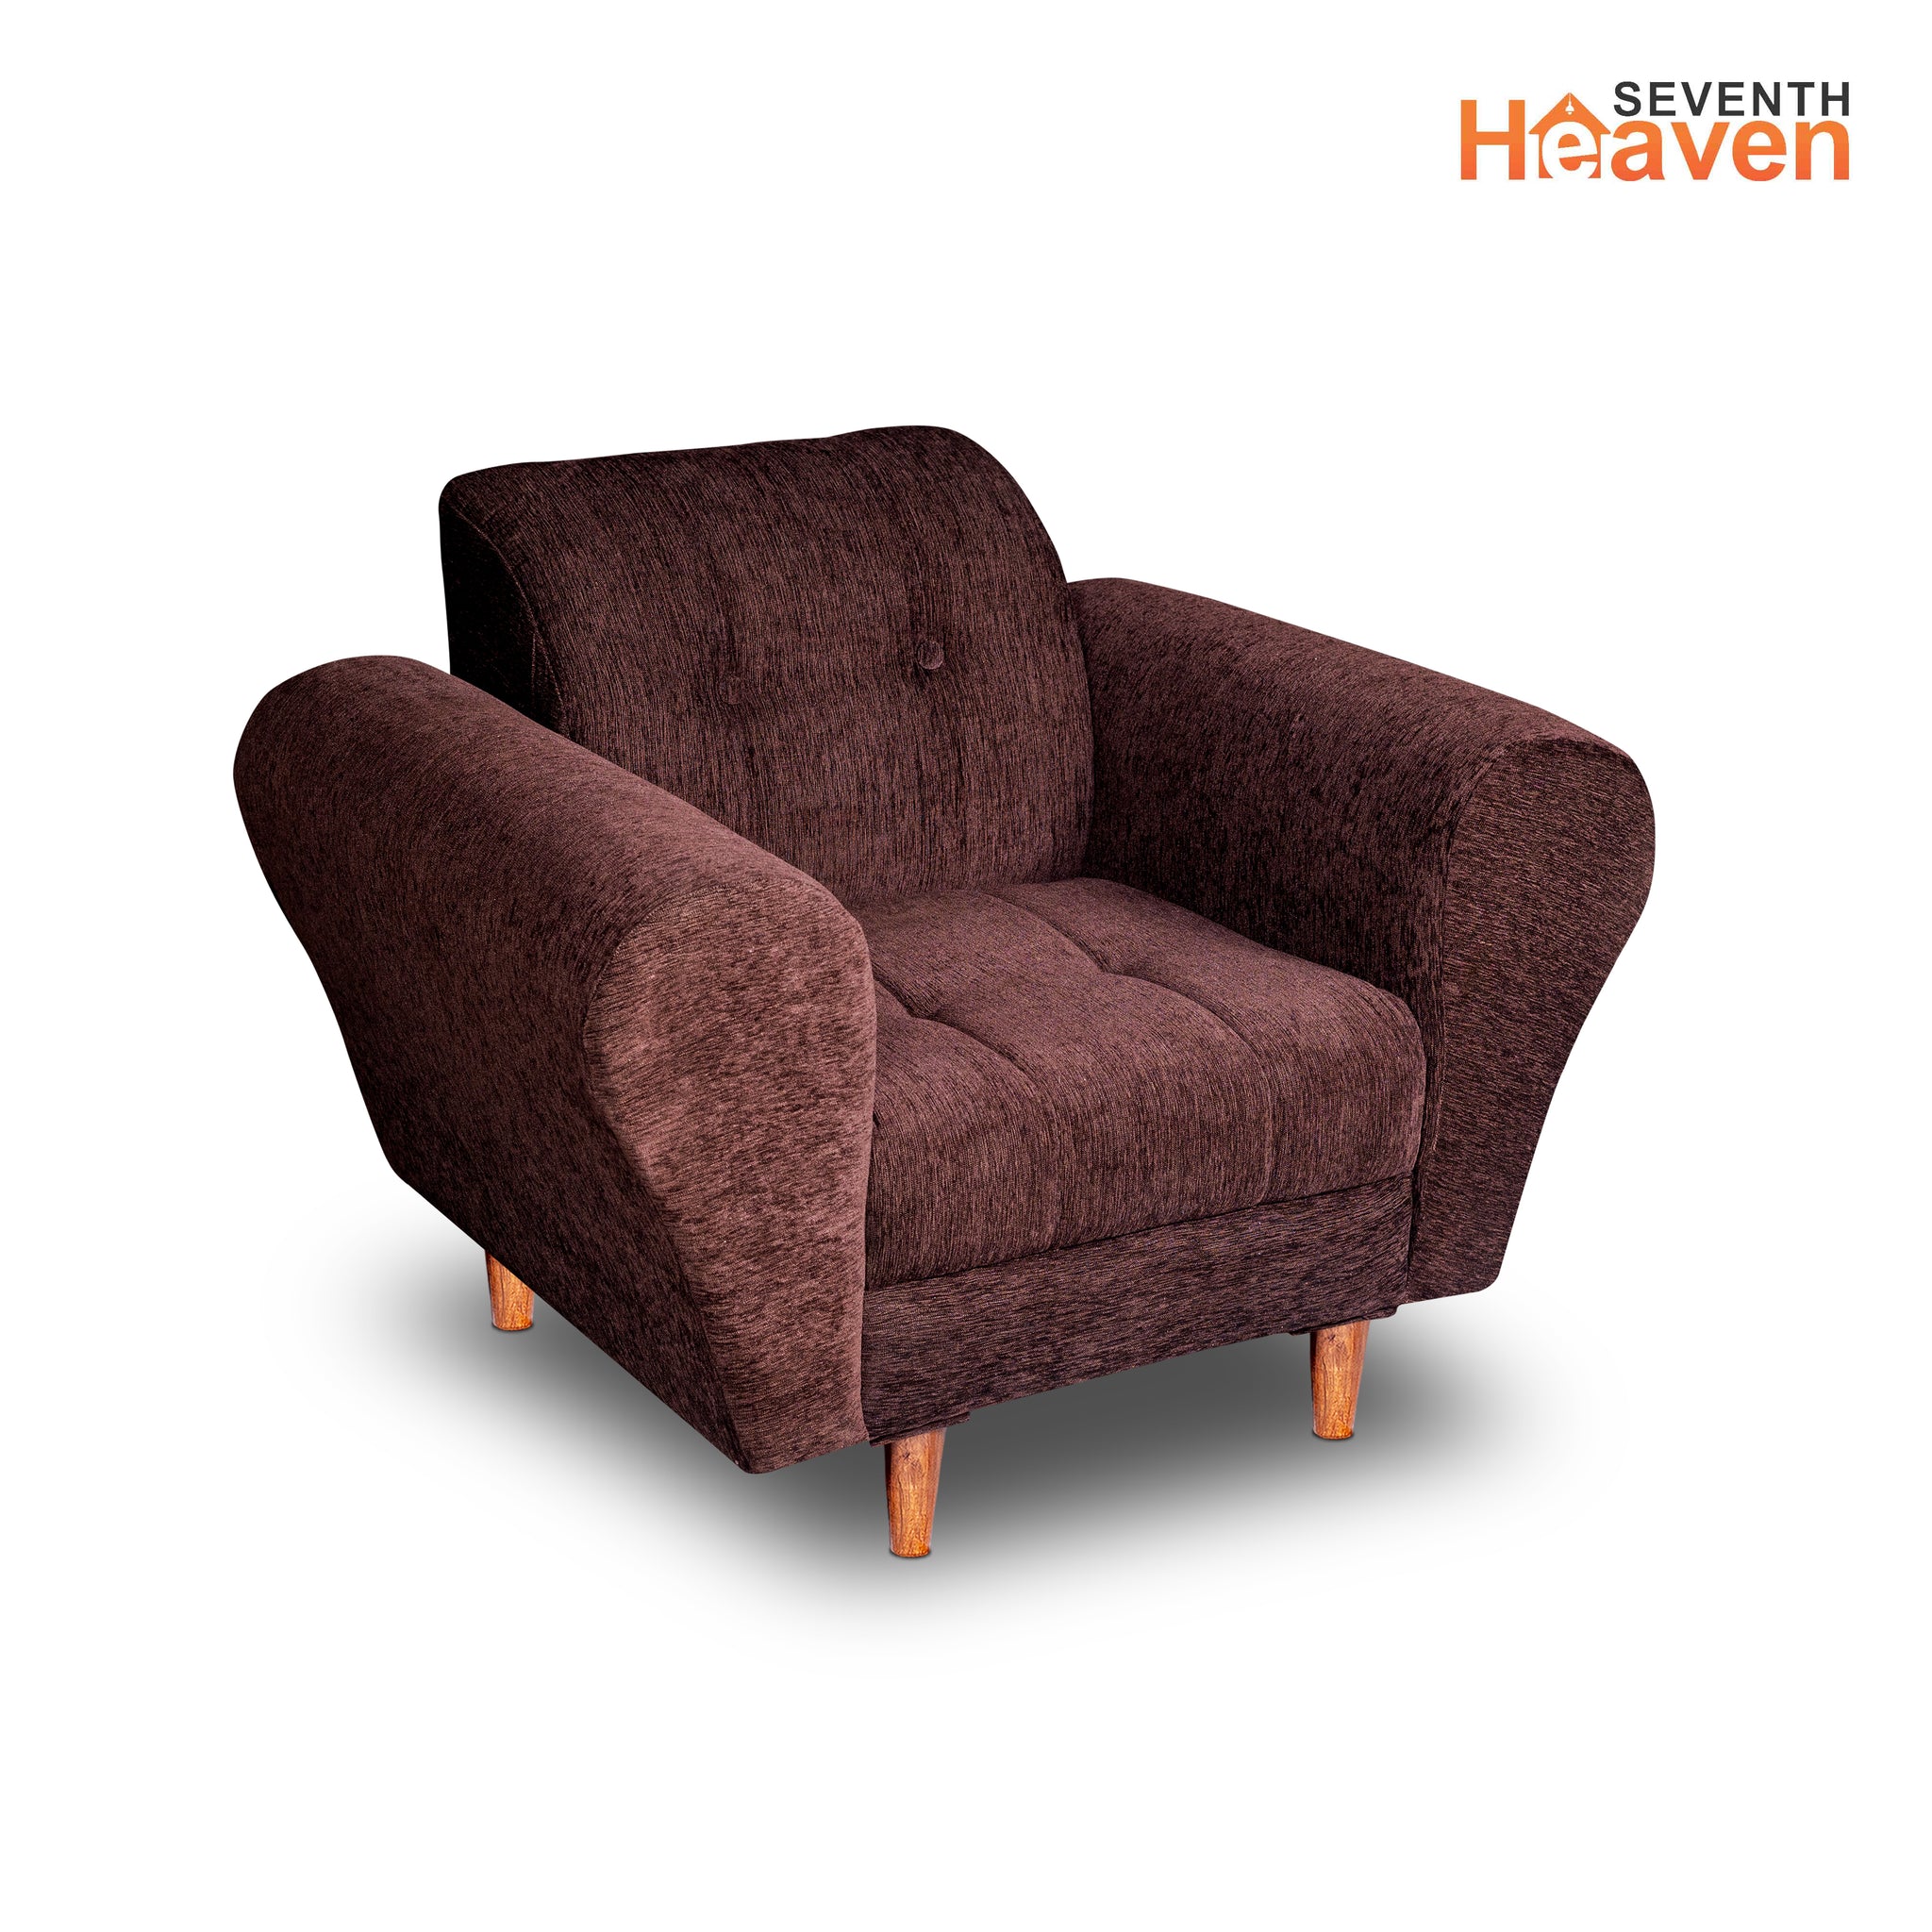 Seventh Heaven Milan 1 Seater Wooden Sofa Set Modern & Elegant Smart Furniture Range for luxurious homes, living rooms and offices. Brown Colour Molphino fabric with sheesham polished wooden legs.